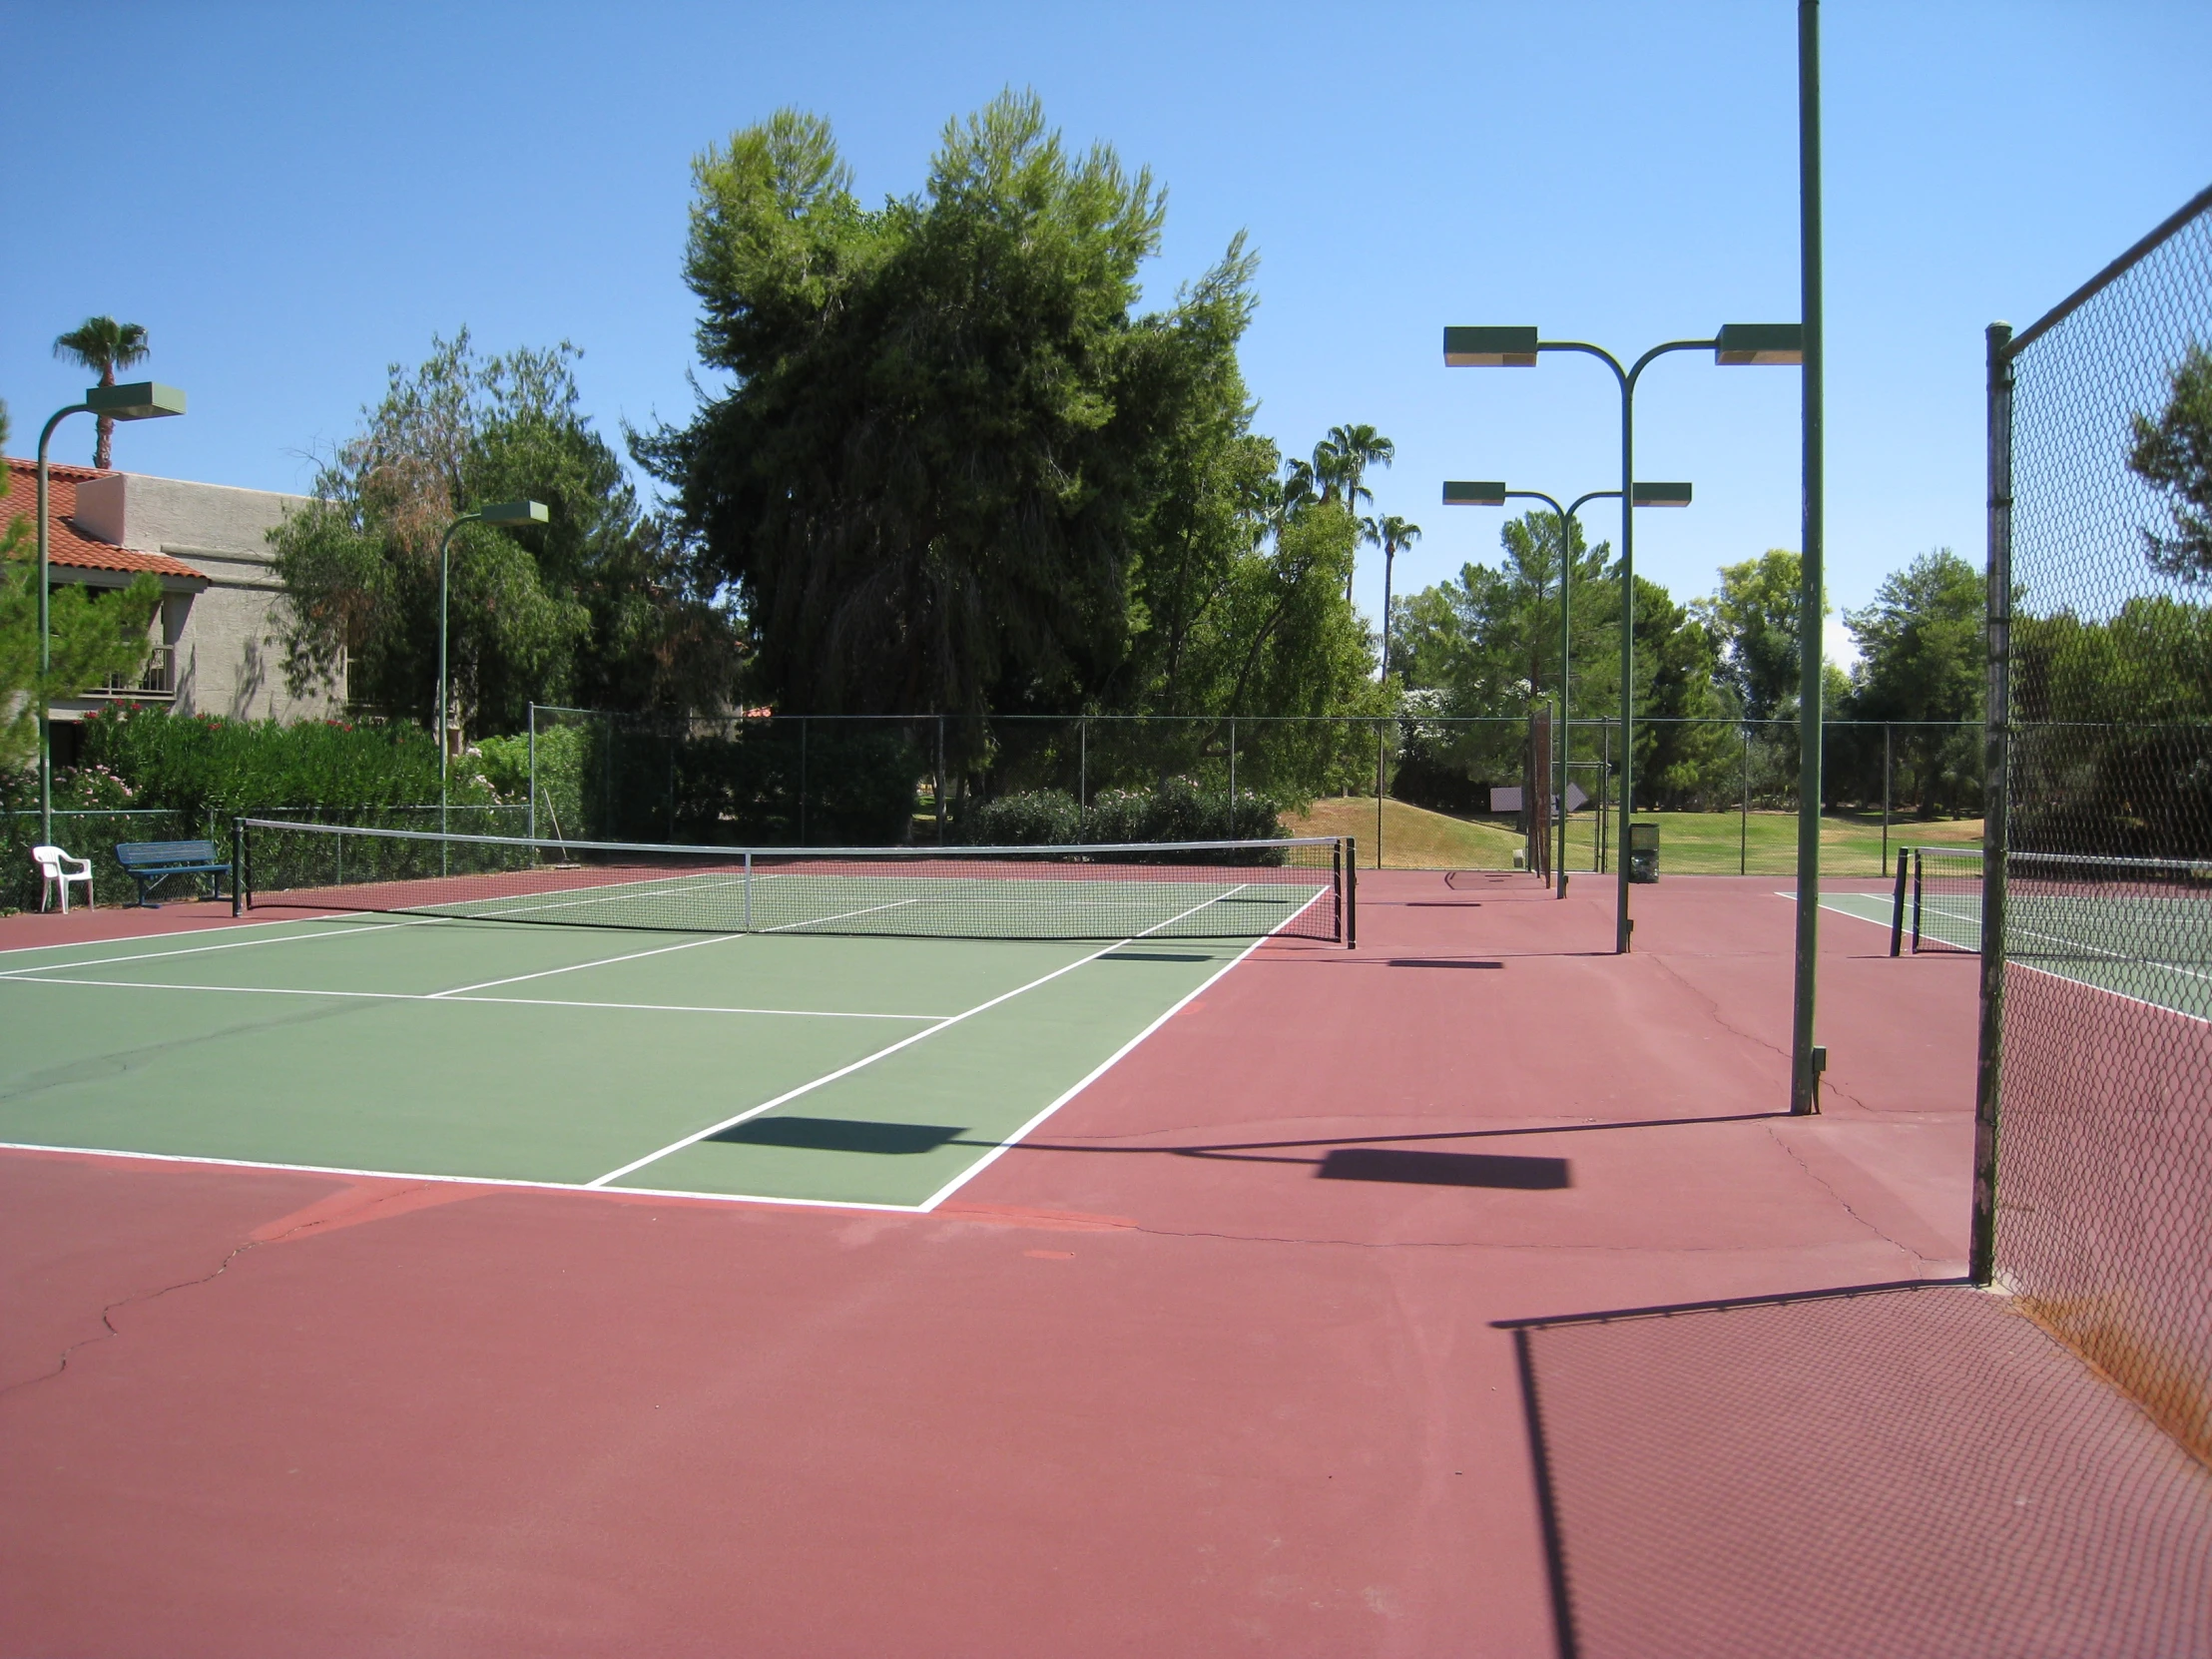 a tennis court with a red floor and white lines